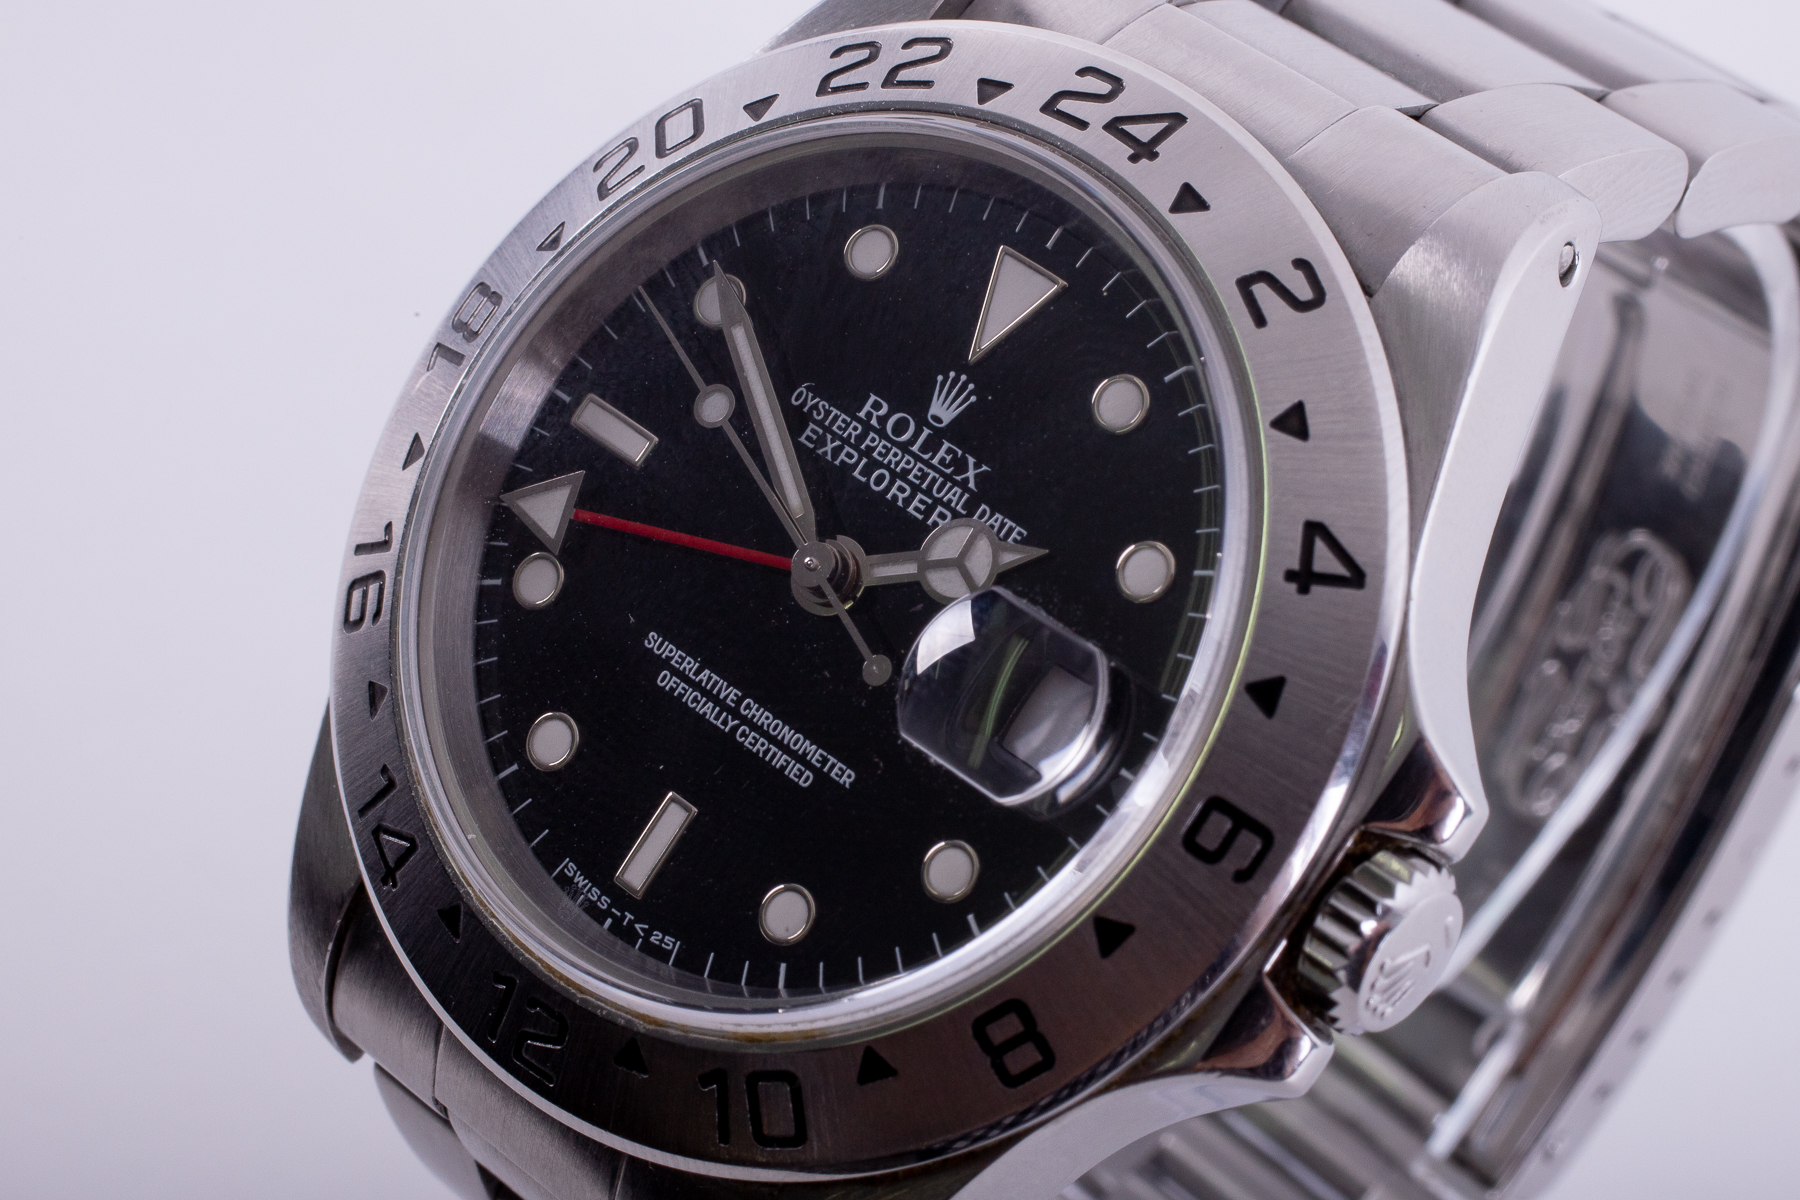 Rolex, a 1996 Rolex Explorer II, Oyster Perpetual Date, model 16570, guarantee number W940985, in - Image 6 of 9